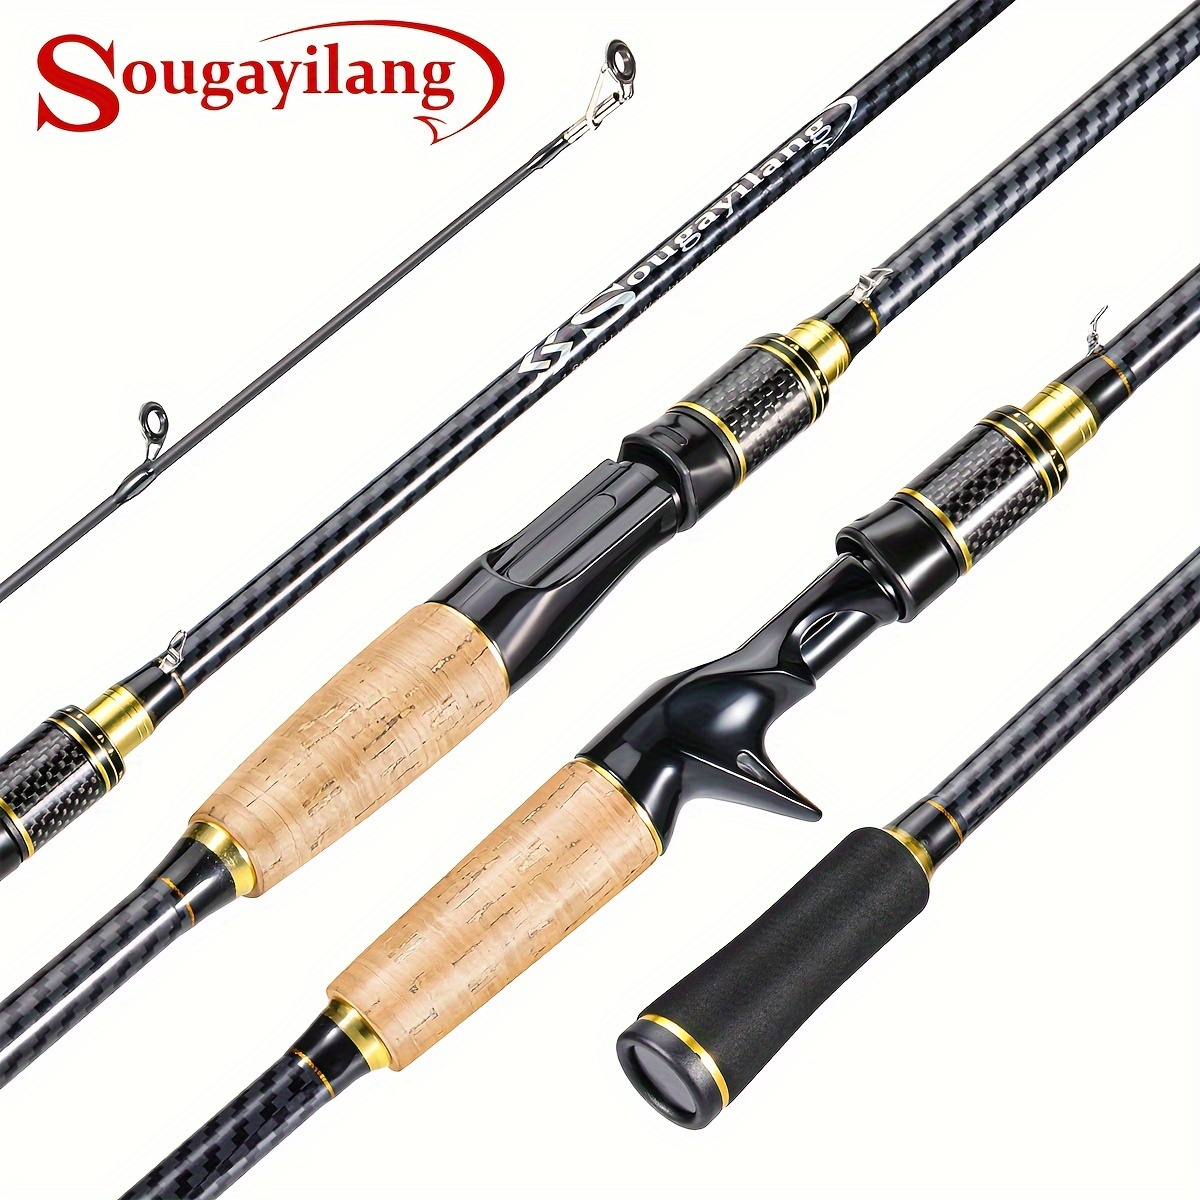 

Sougayilang 180cm/5.9ft 2-section Fishing Rod, Composite Glass Fiber And Graphite Blanks For Freshwater Fishing